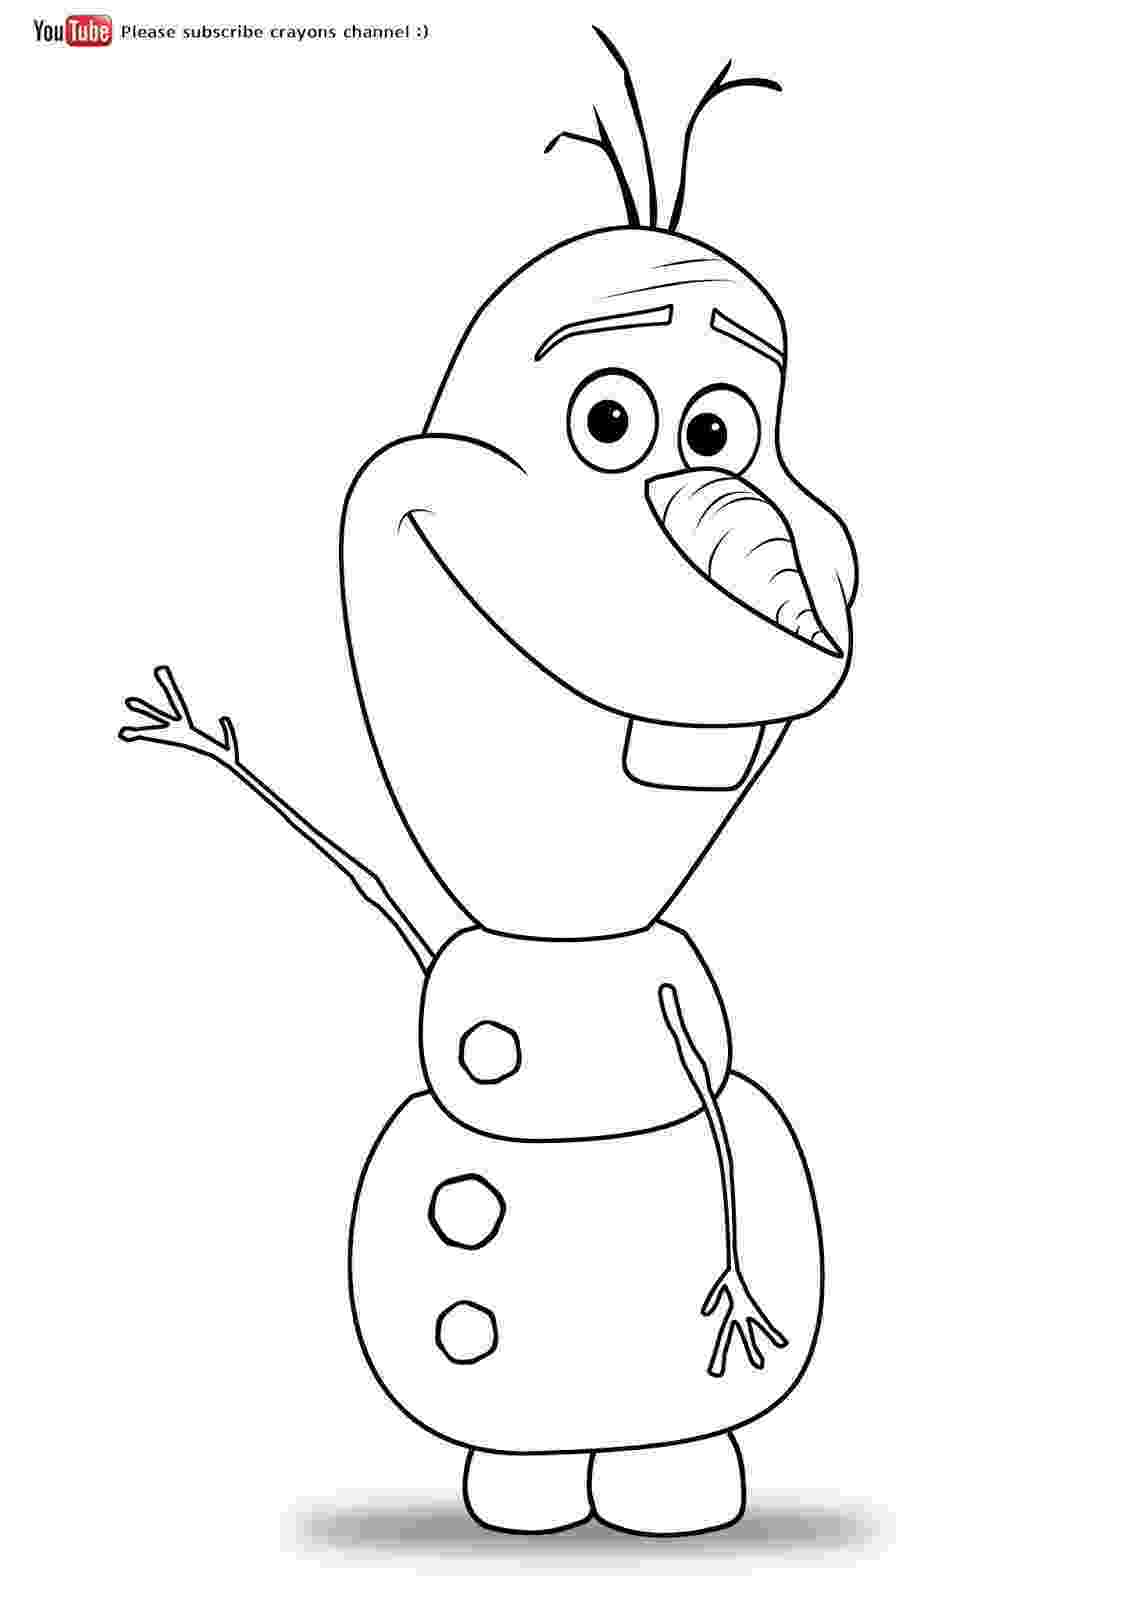 olaf pictures to print frozen olaf coloring pages at getdrawings free download print to olaf pictures 